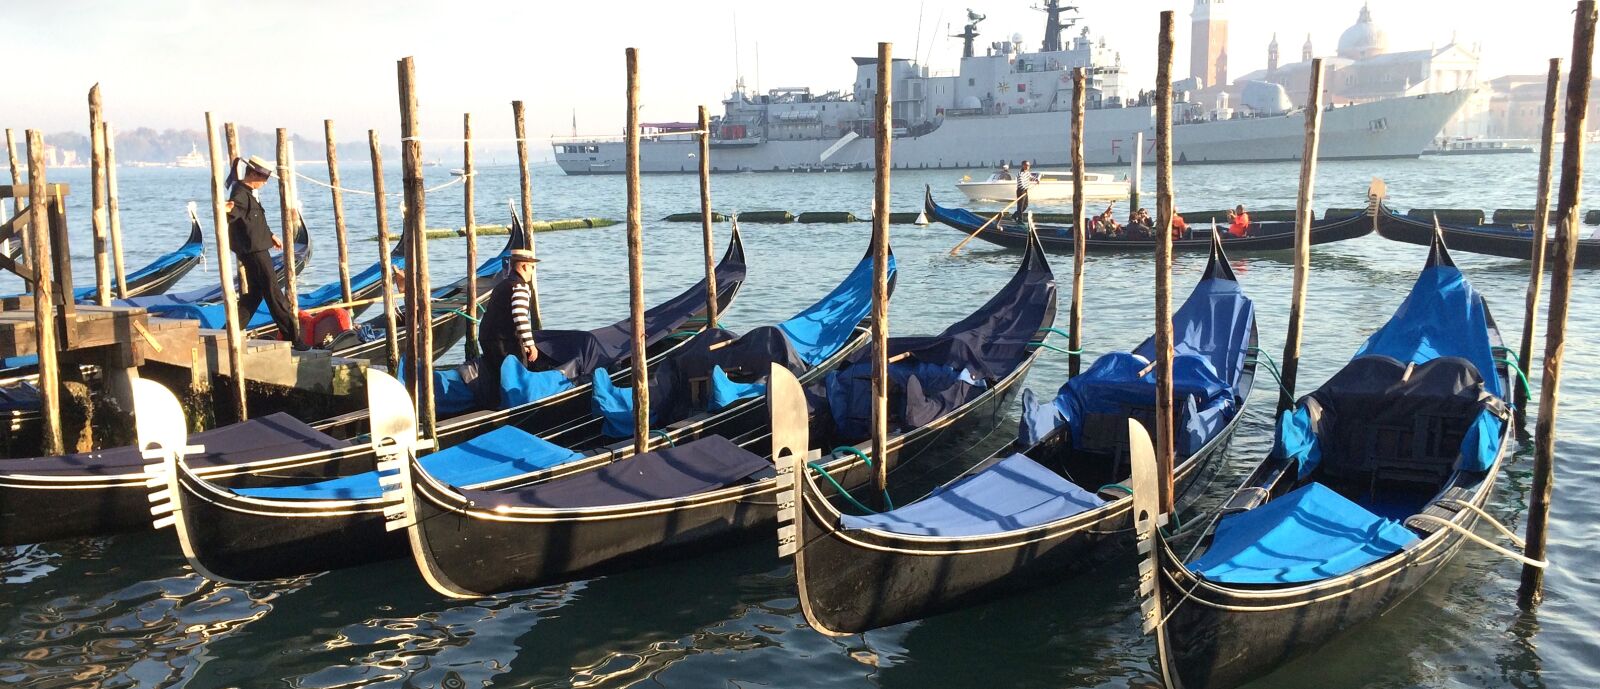 Apple iPhone 5s sample photo. Venice, water, boats photography